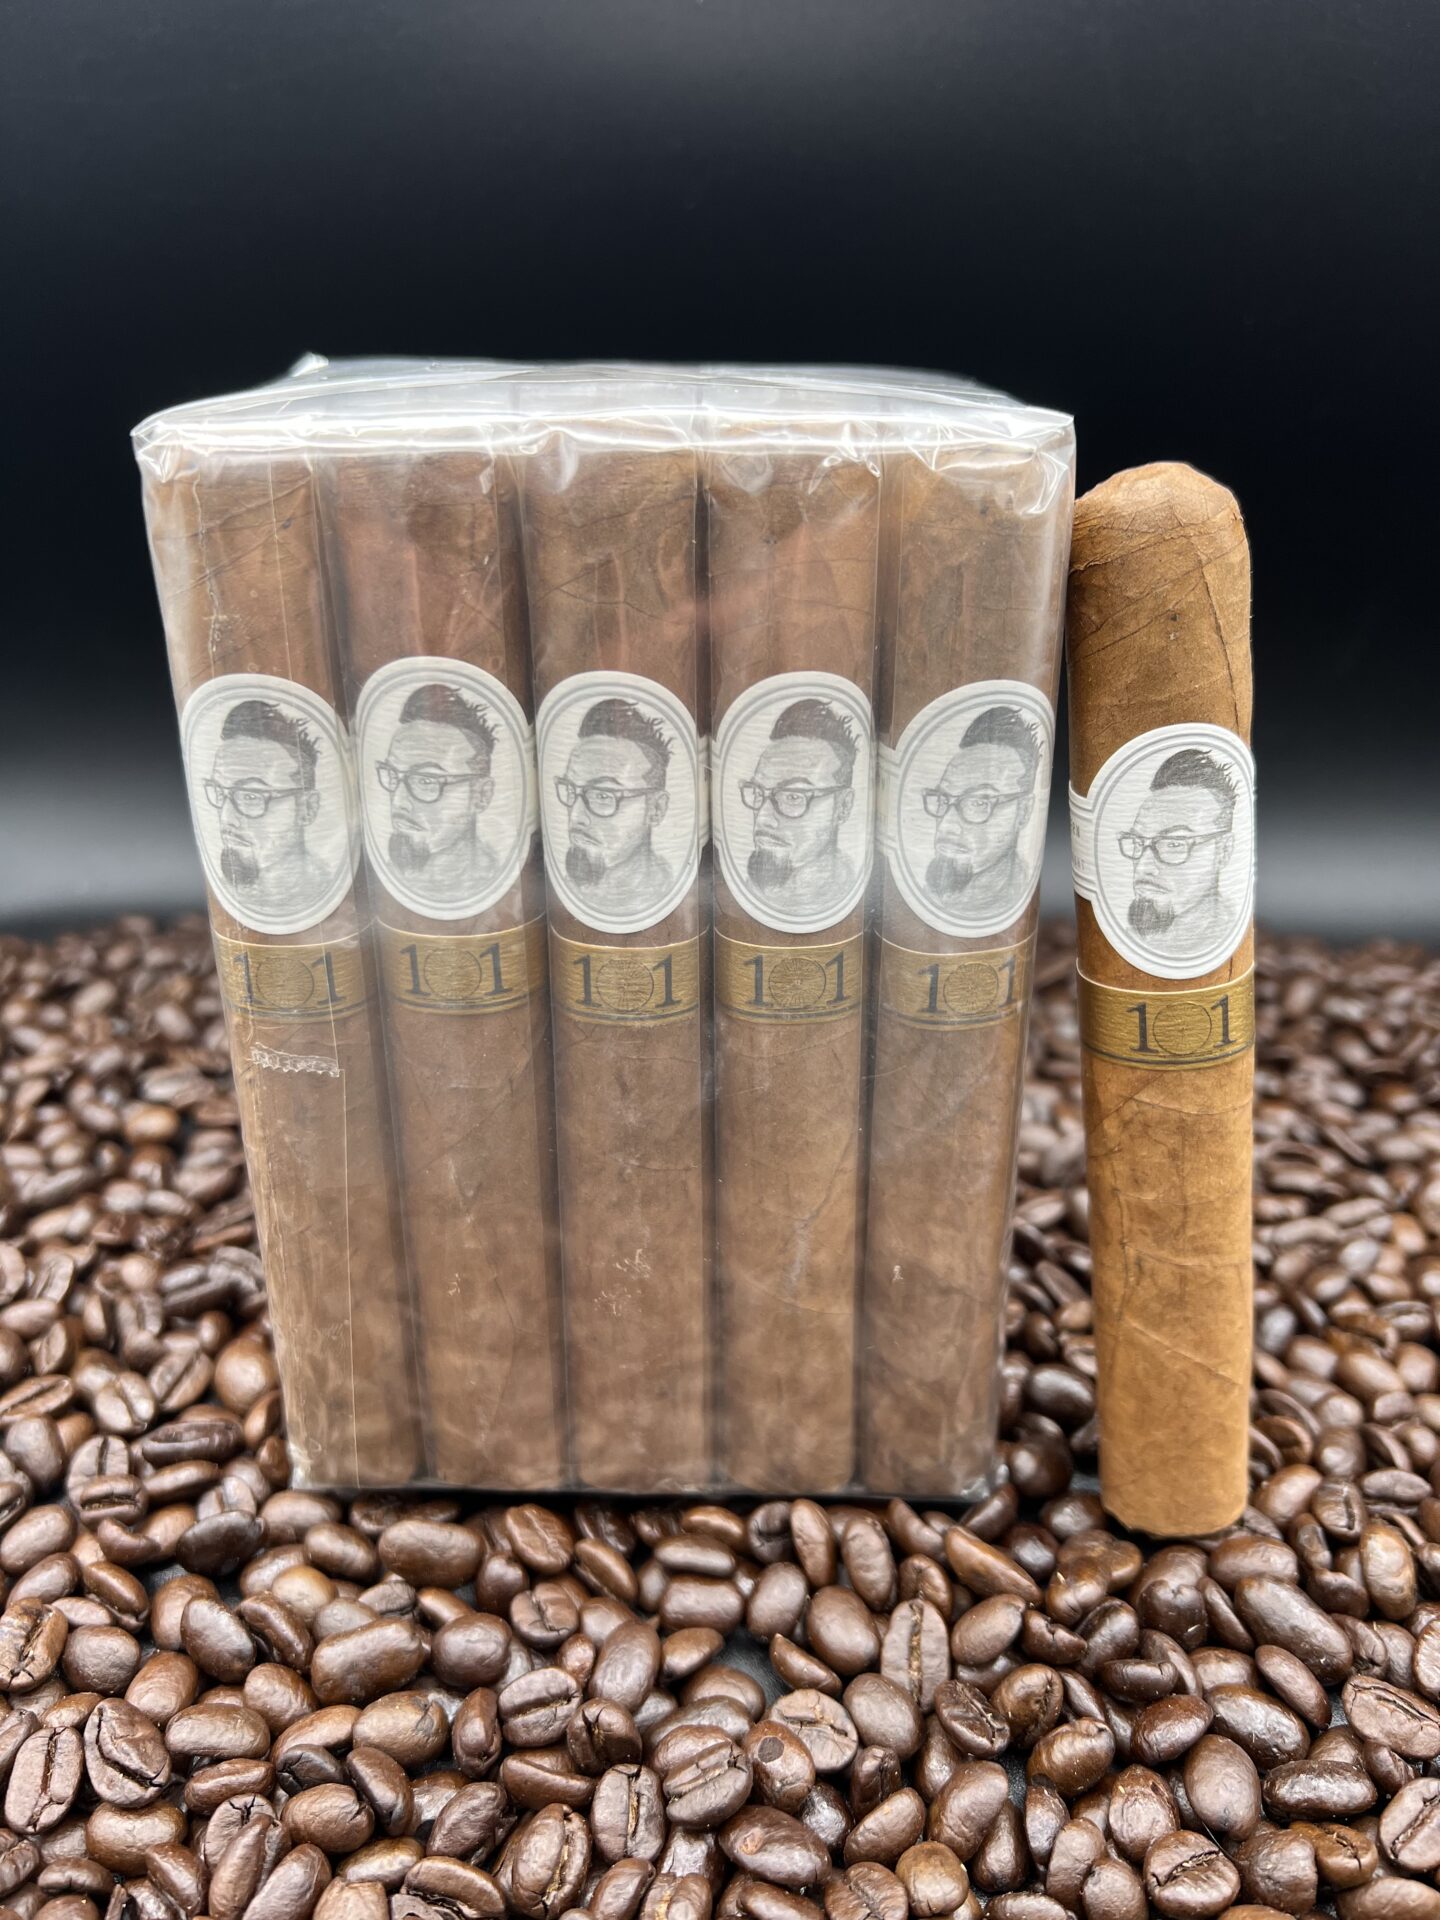 Caldwell/Room101 Golden Egg Robusto cigars supplied by Sir Louis Cigars